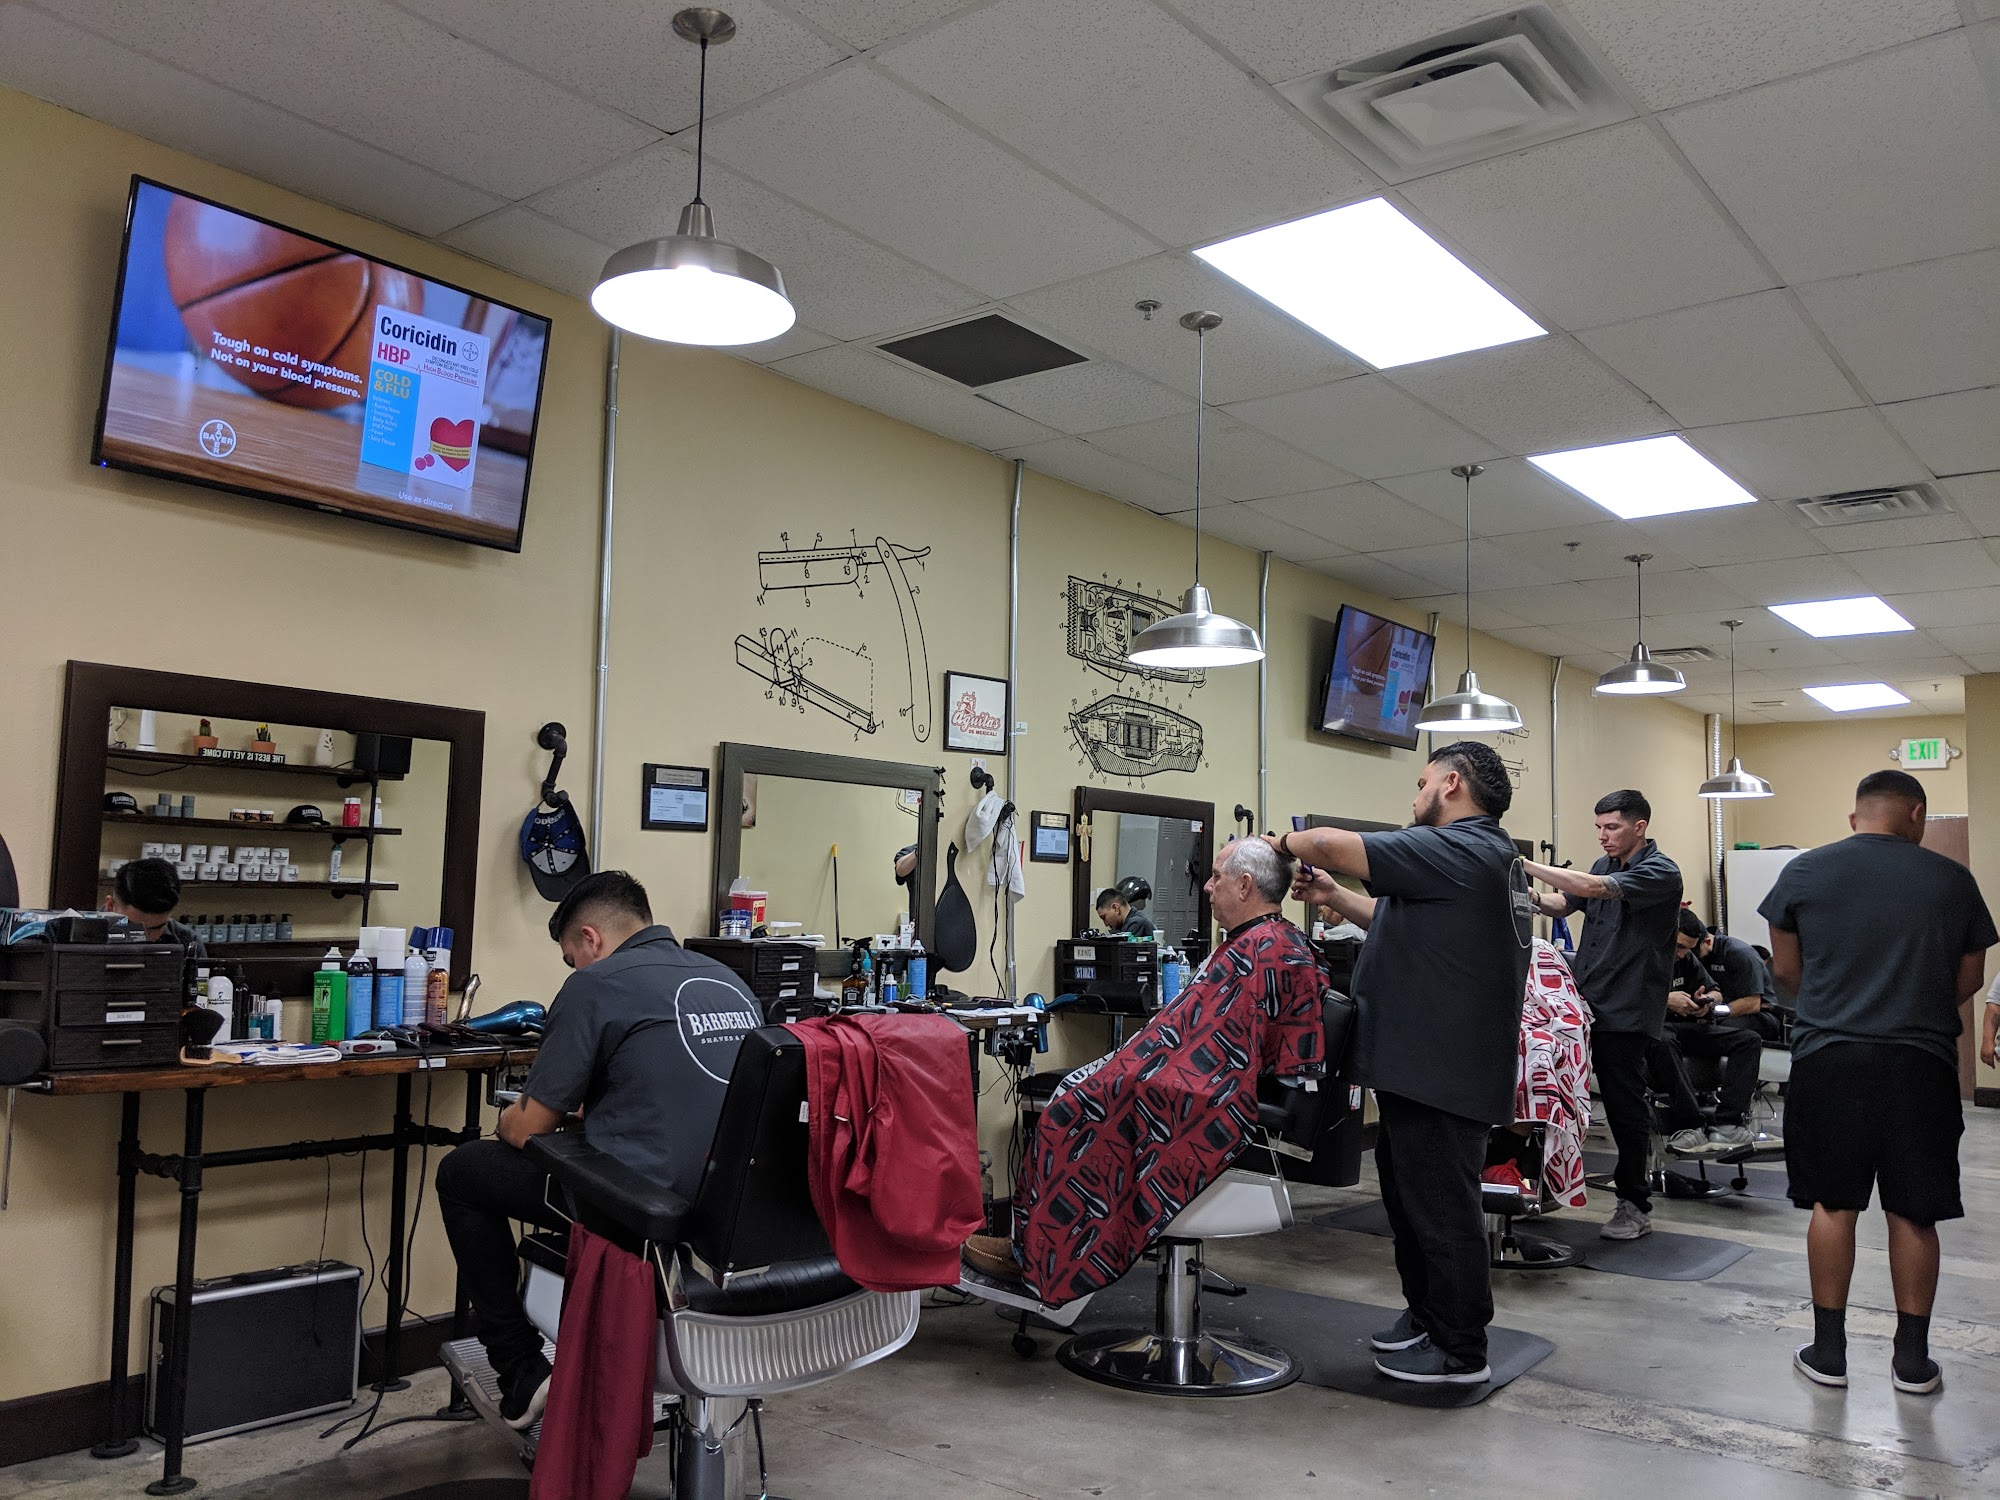 Barberia Shaves and Cuts - Barber Shop